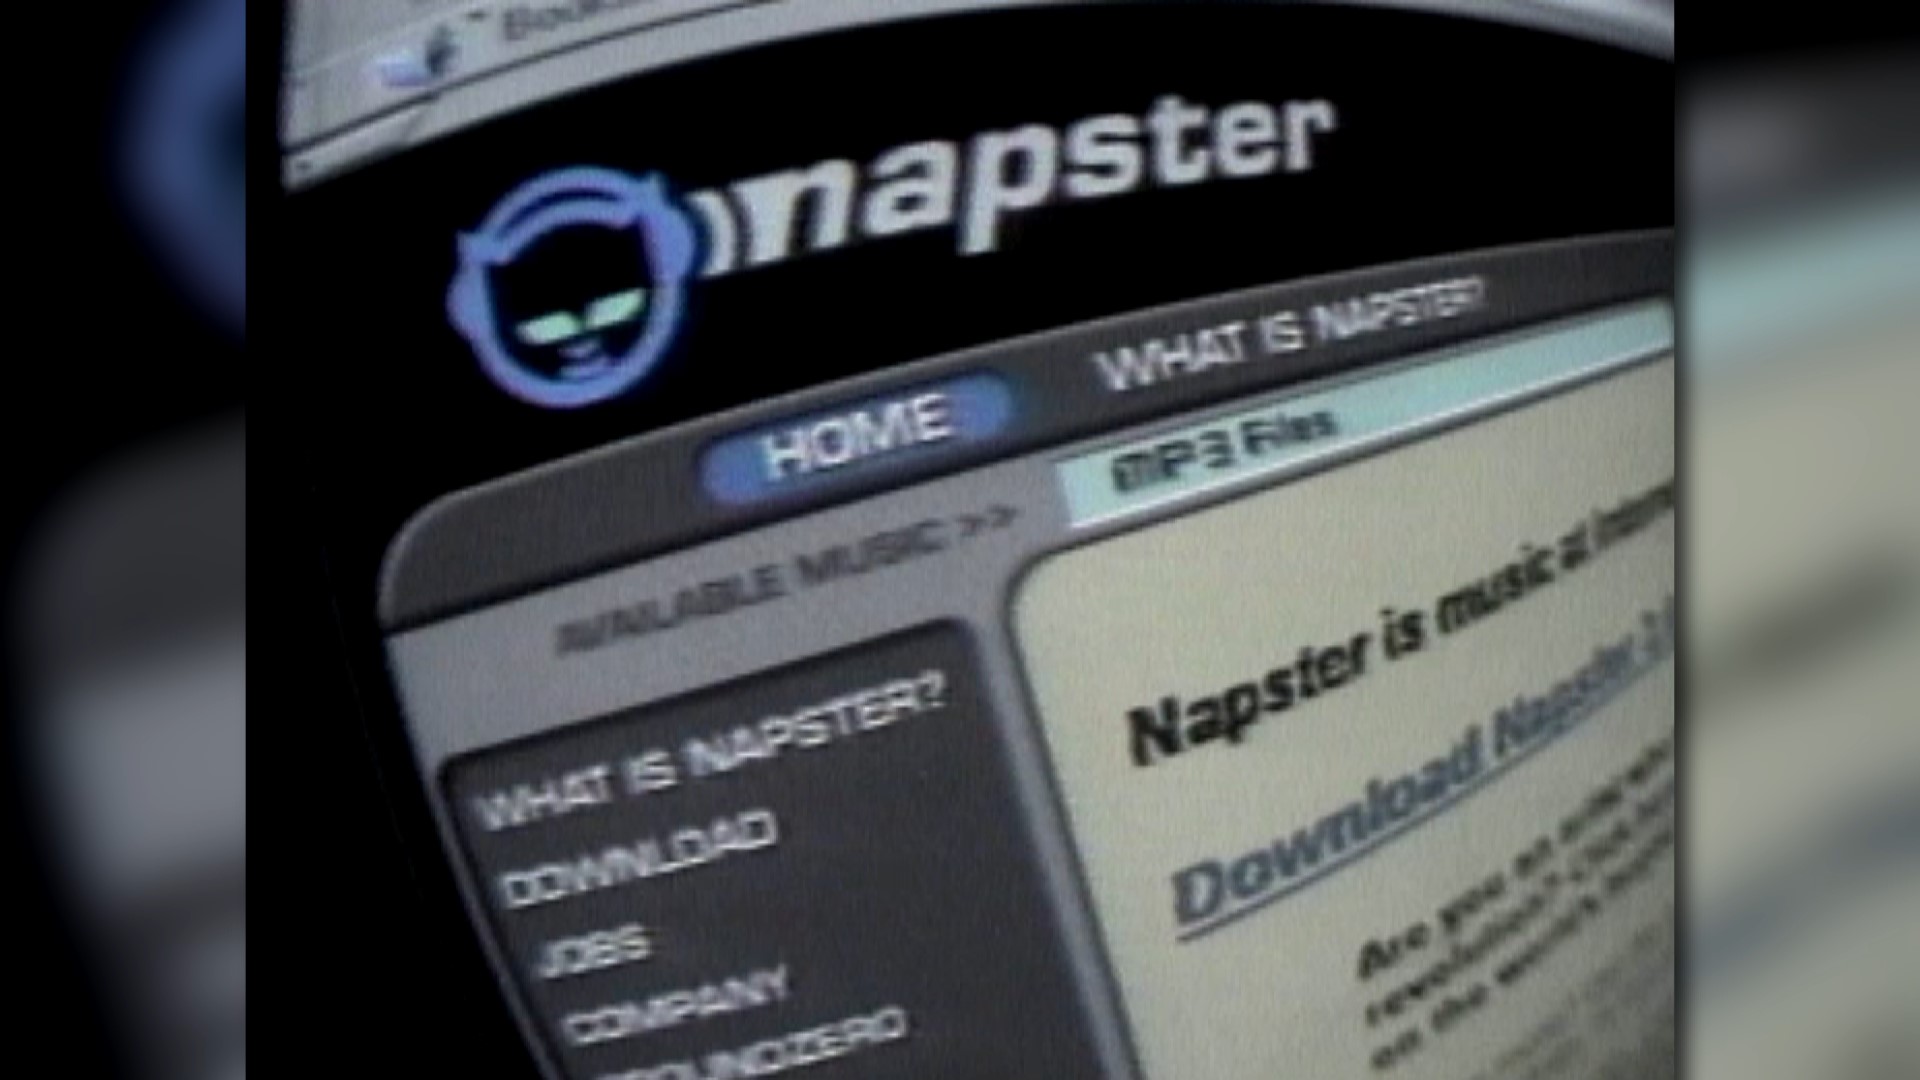 Following a major ruling against the company in court, Napster was forced to shut down its service in 2001.